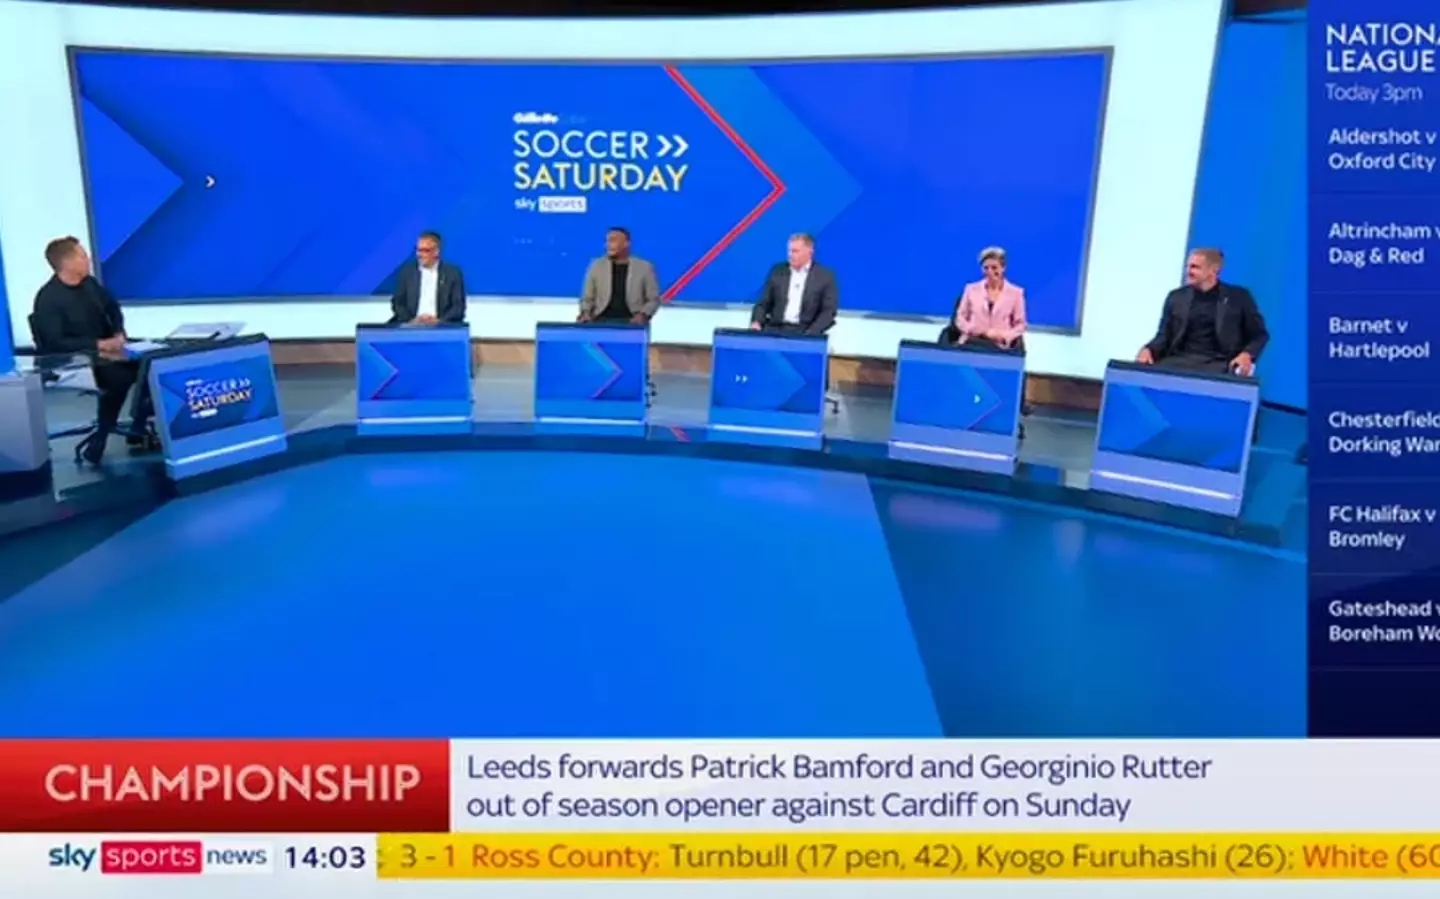 Soccer Saturday's new layout